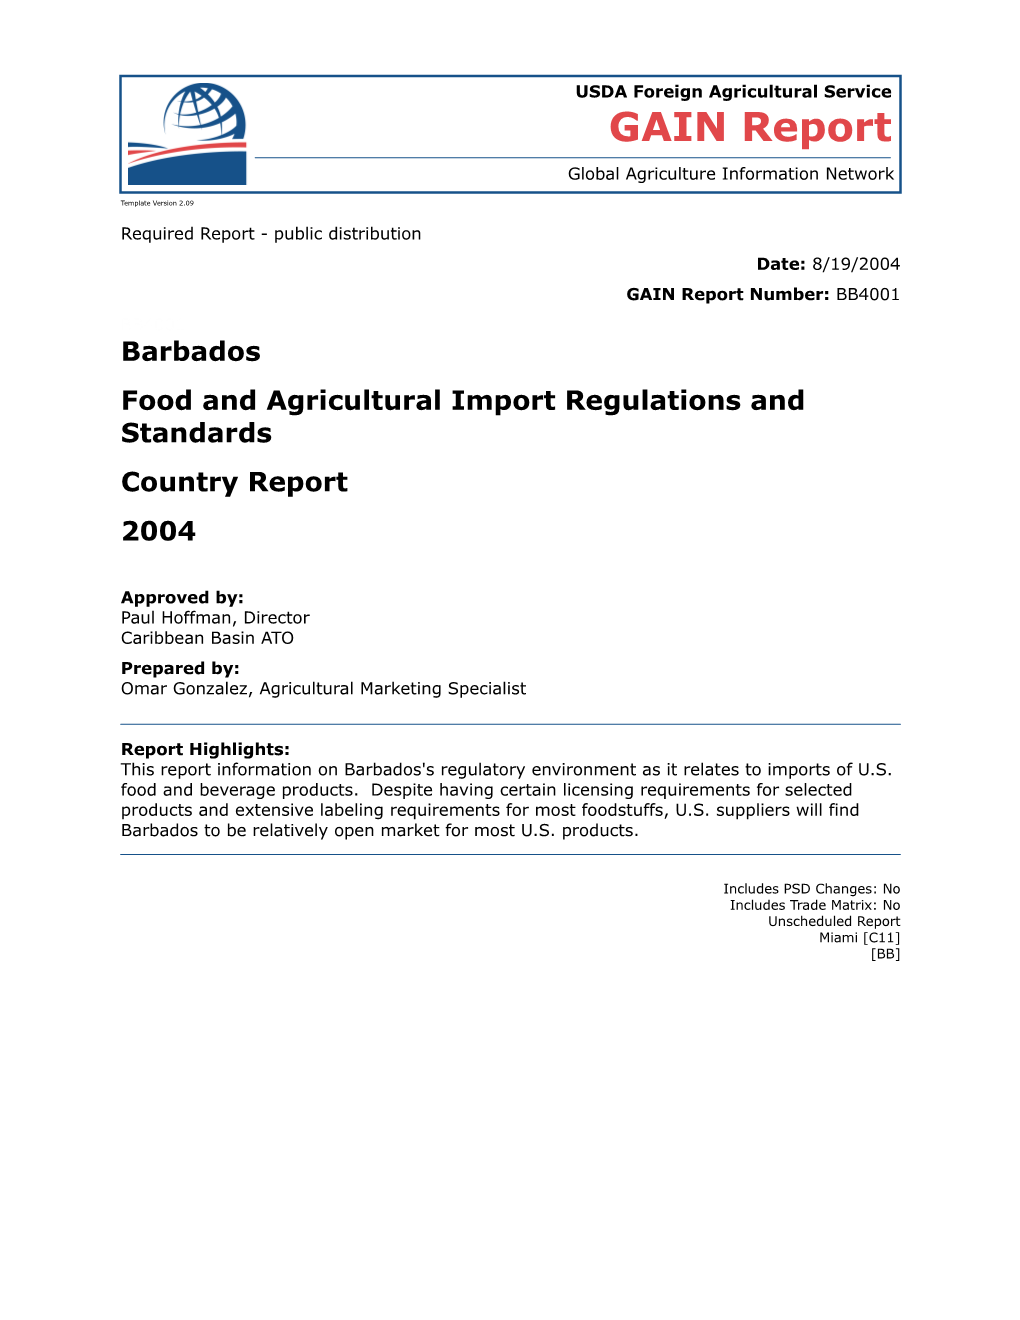 Food and Agricultural Import Regulations and Standards s6